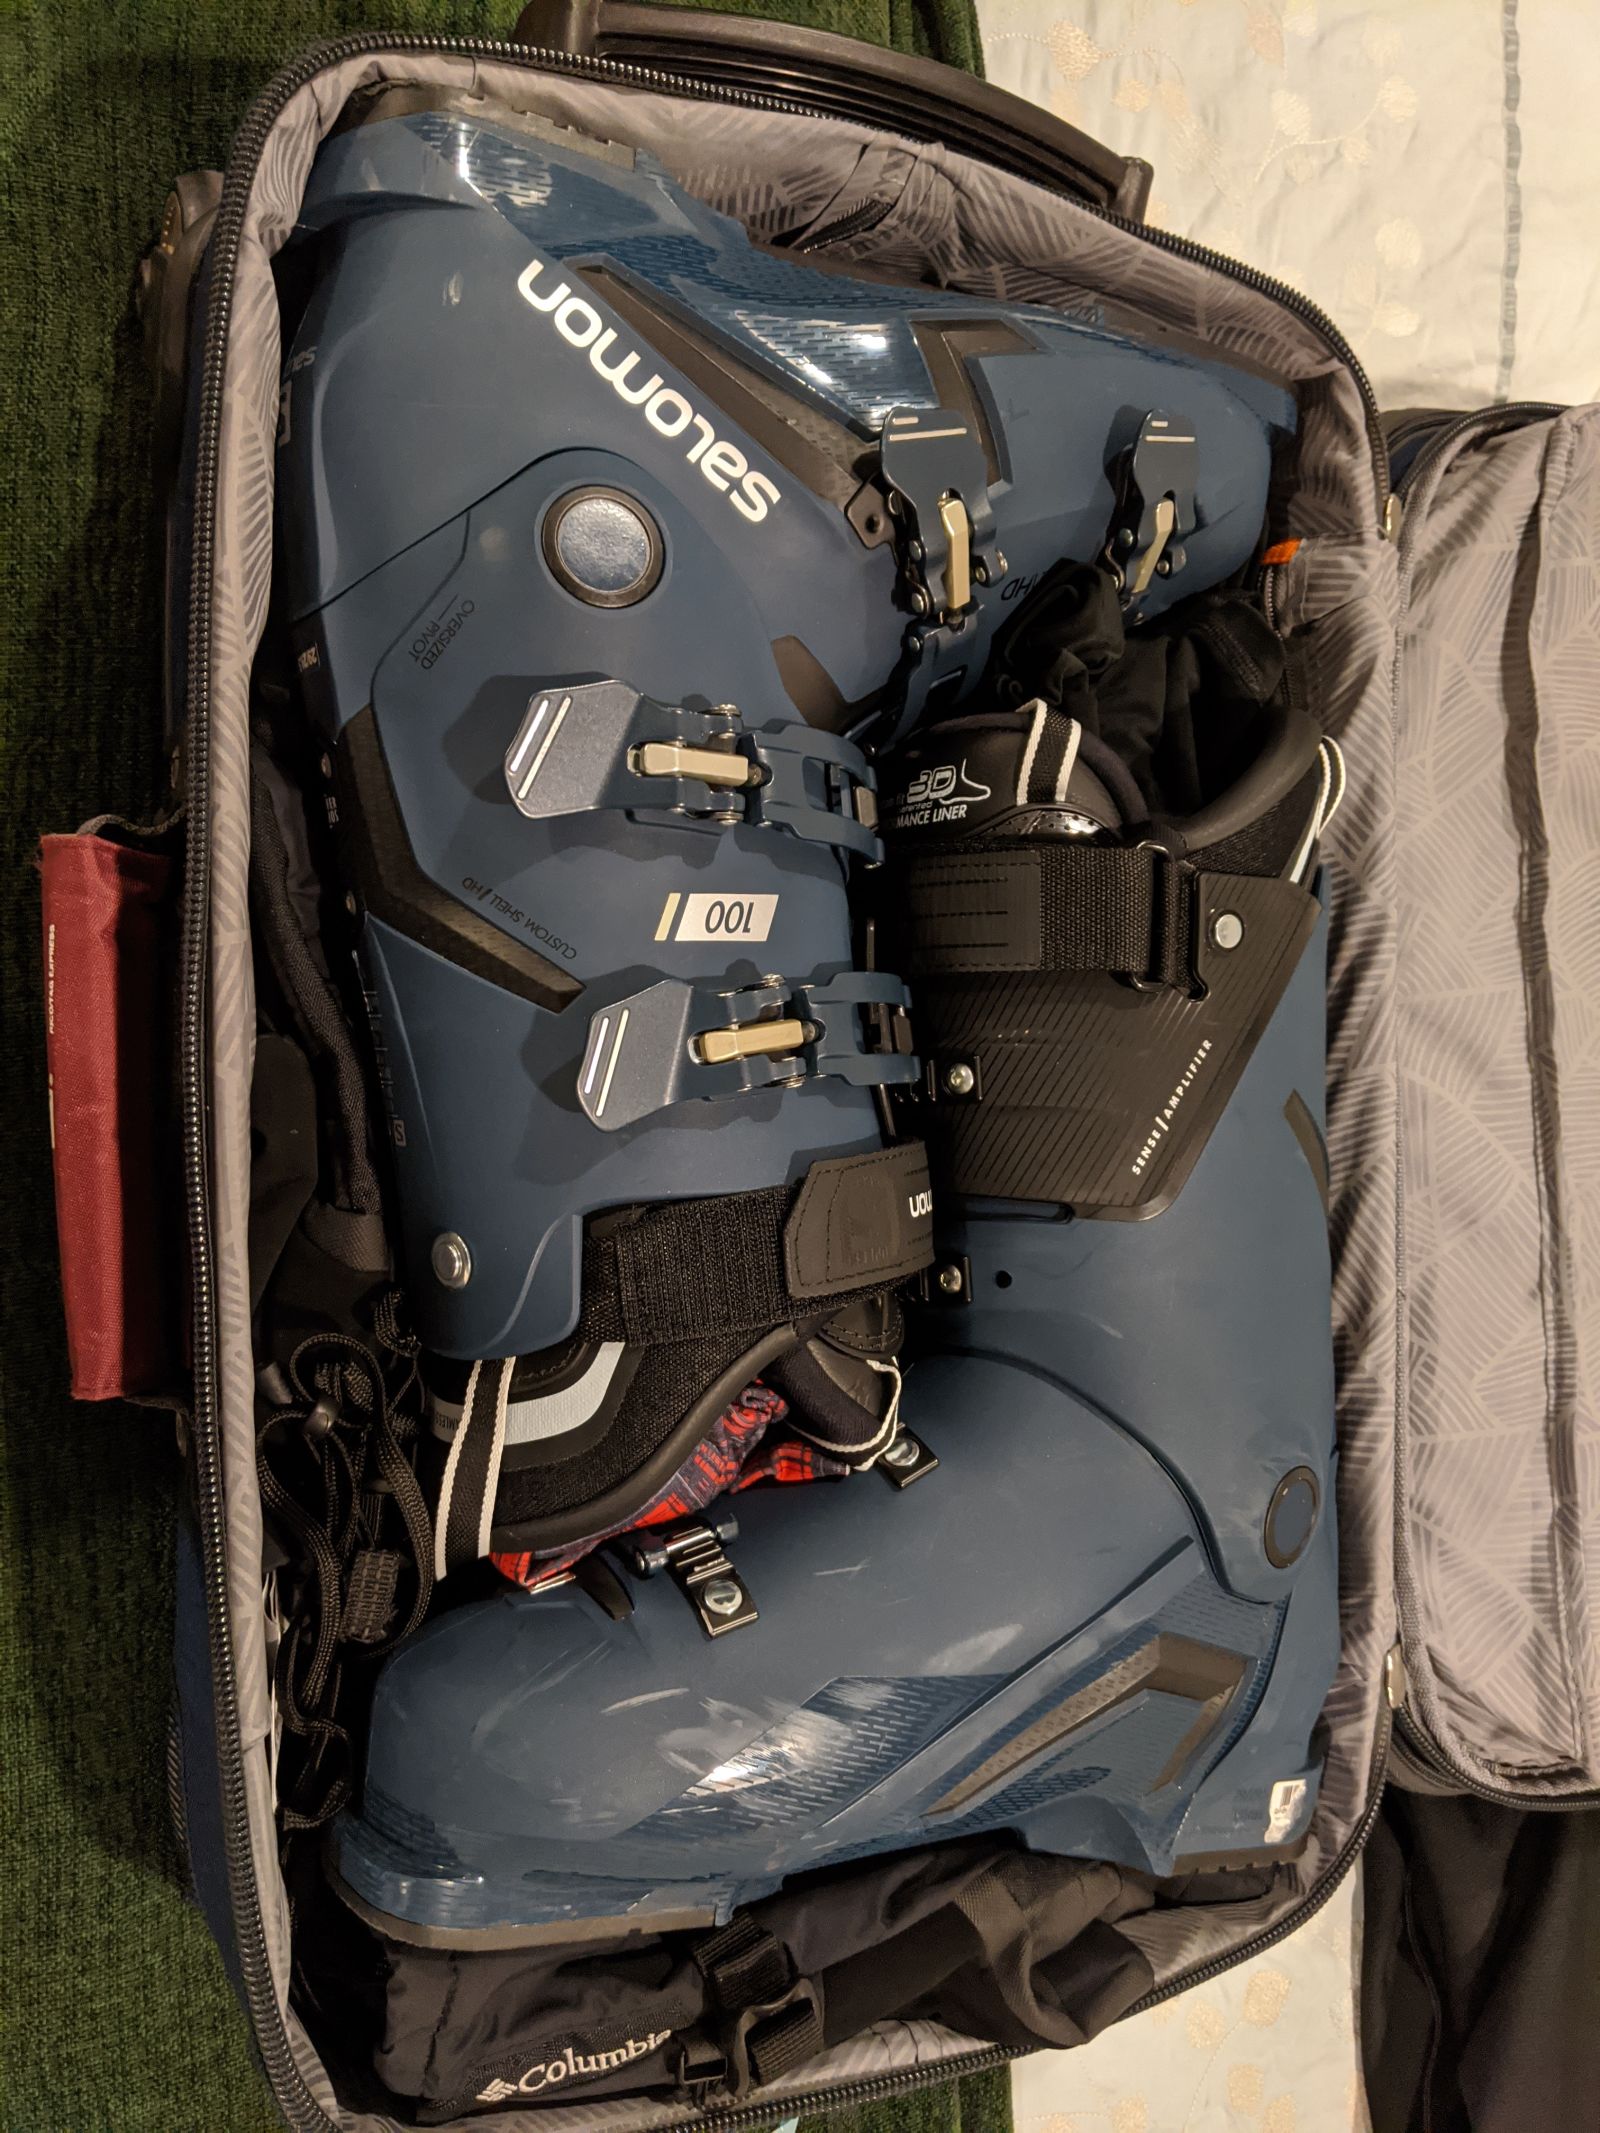 Illustration for article titled Packing for a ski weekend (update: no problem)